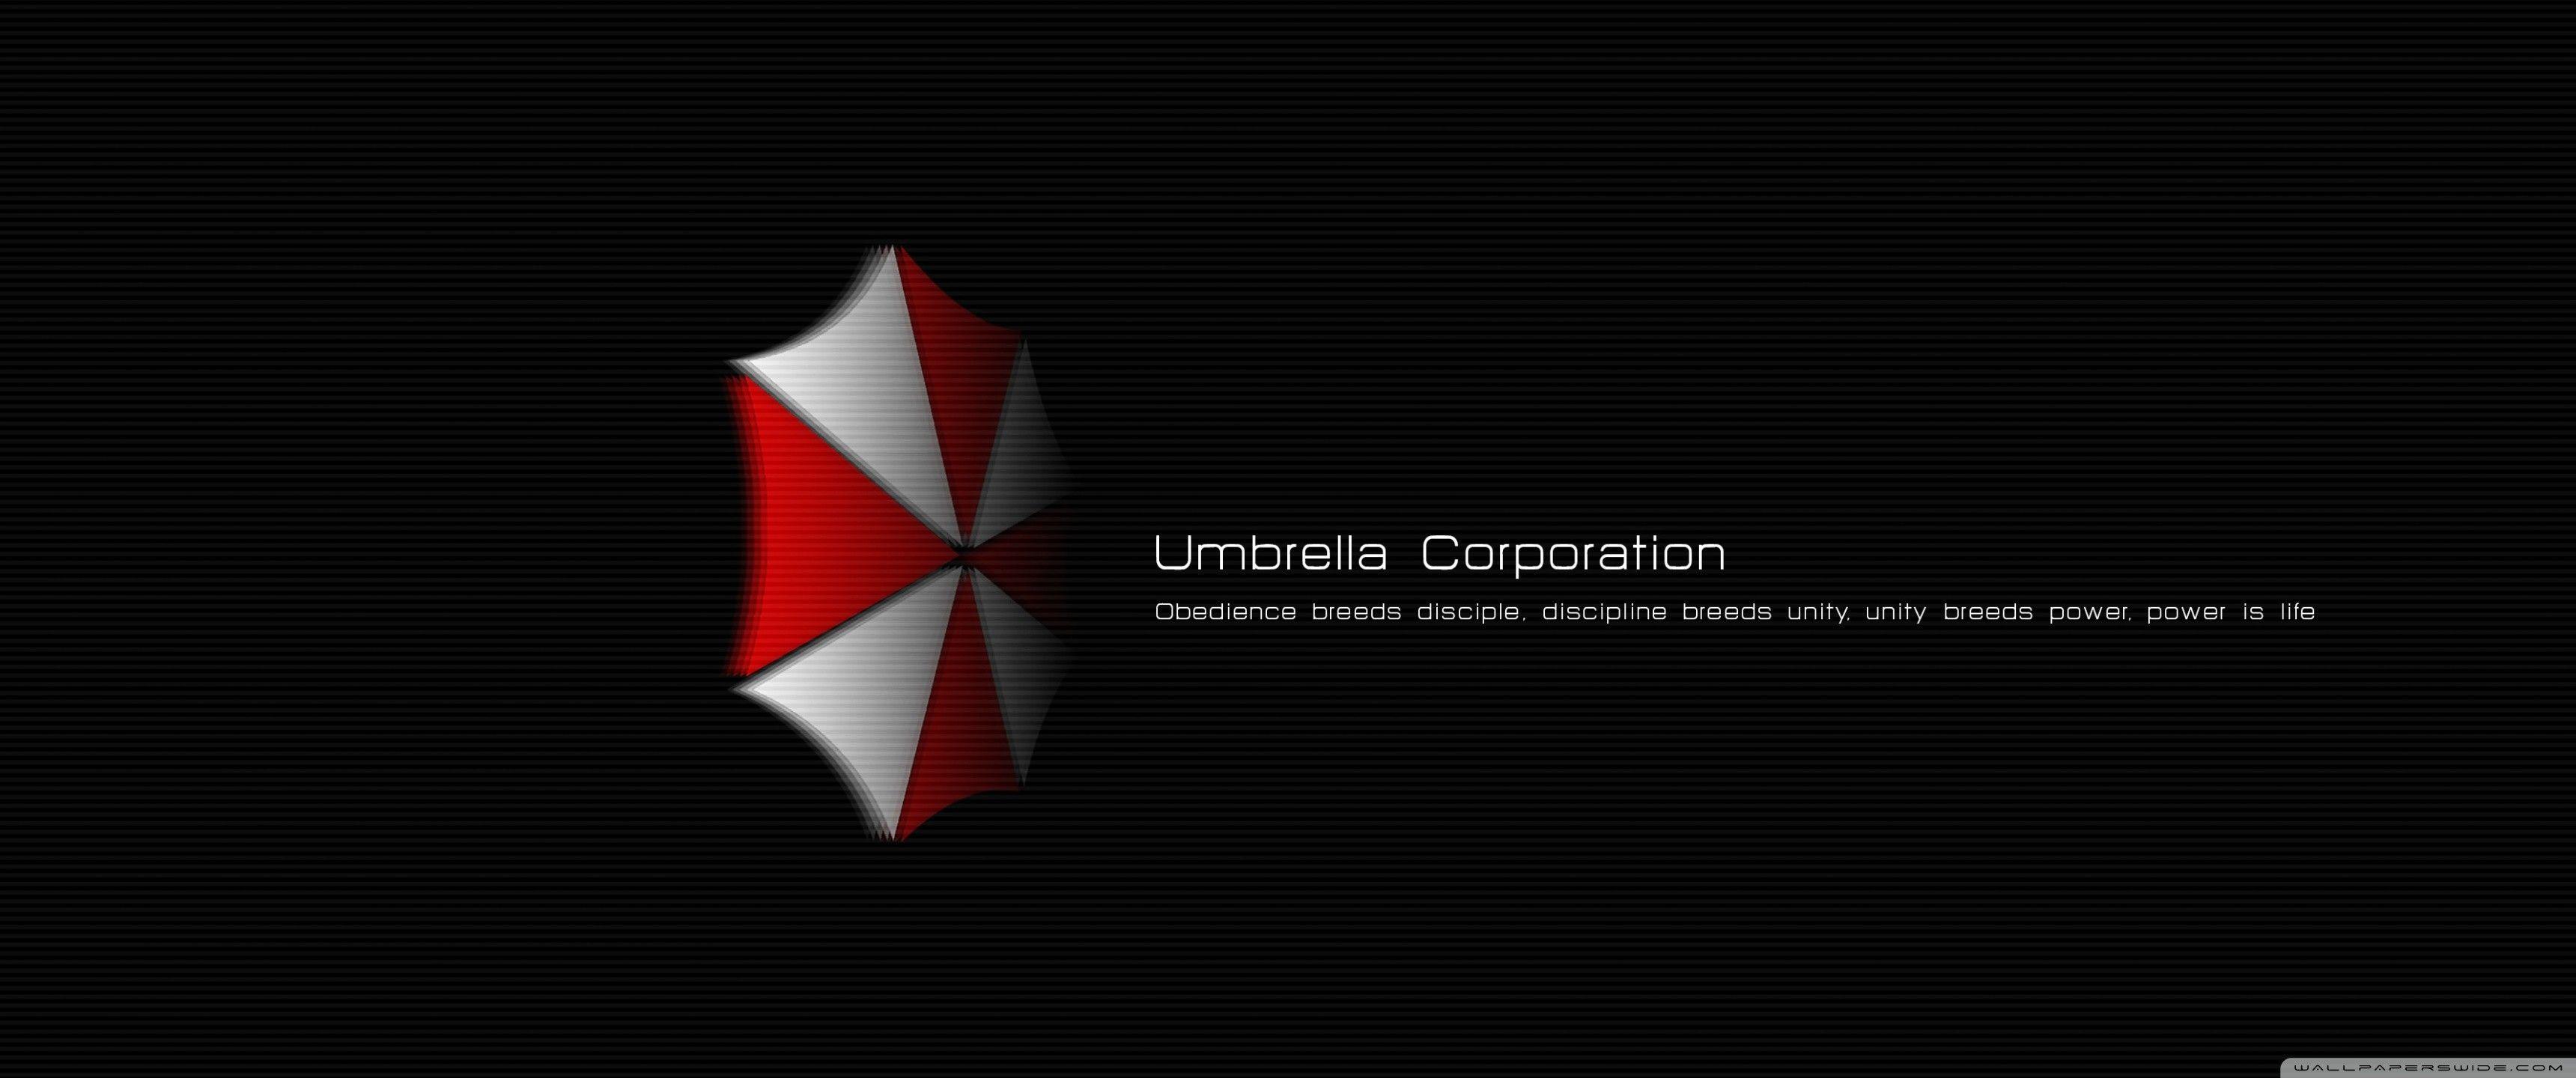 Any better 3440x1440 Umbrella logo wallpaper than this? The fact they misspelled discipline is kinda annoying